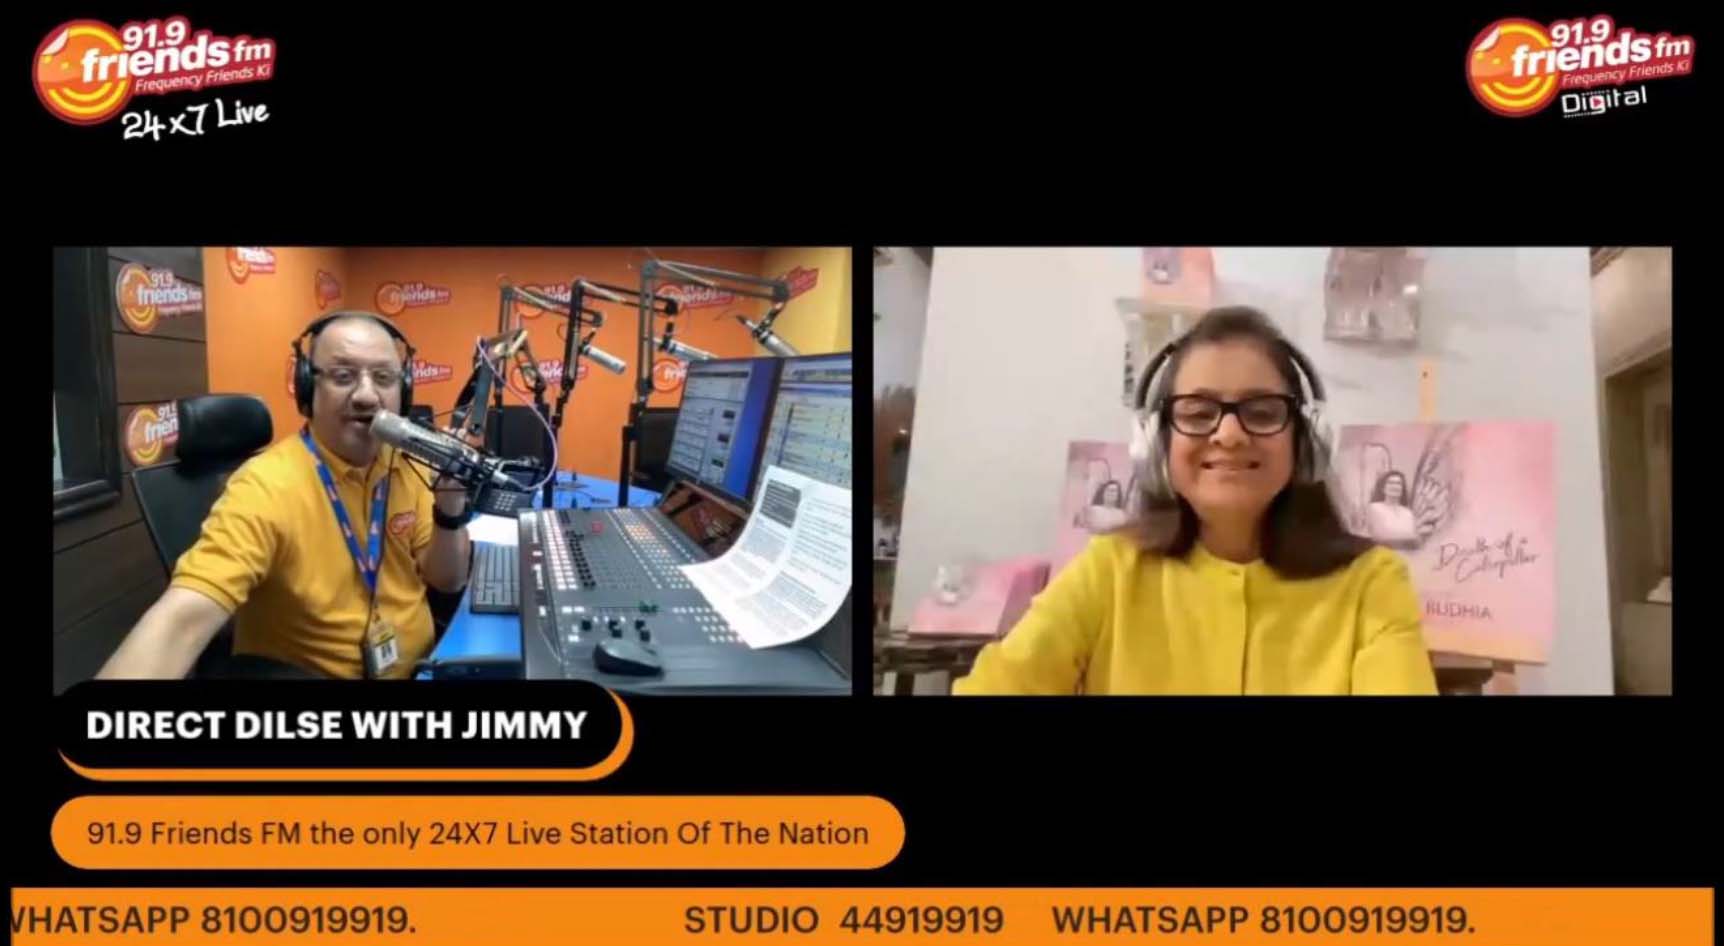 IN CONVERSATION WITH JIMMY – LIVE ON 91.9 FRIENDS FM